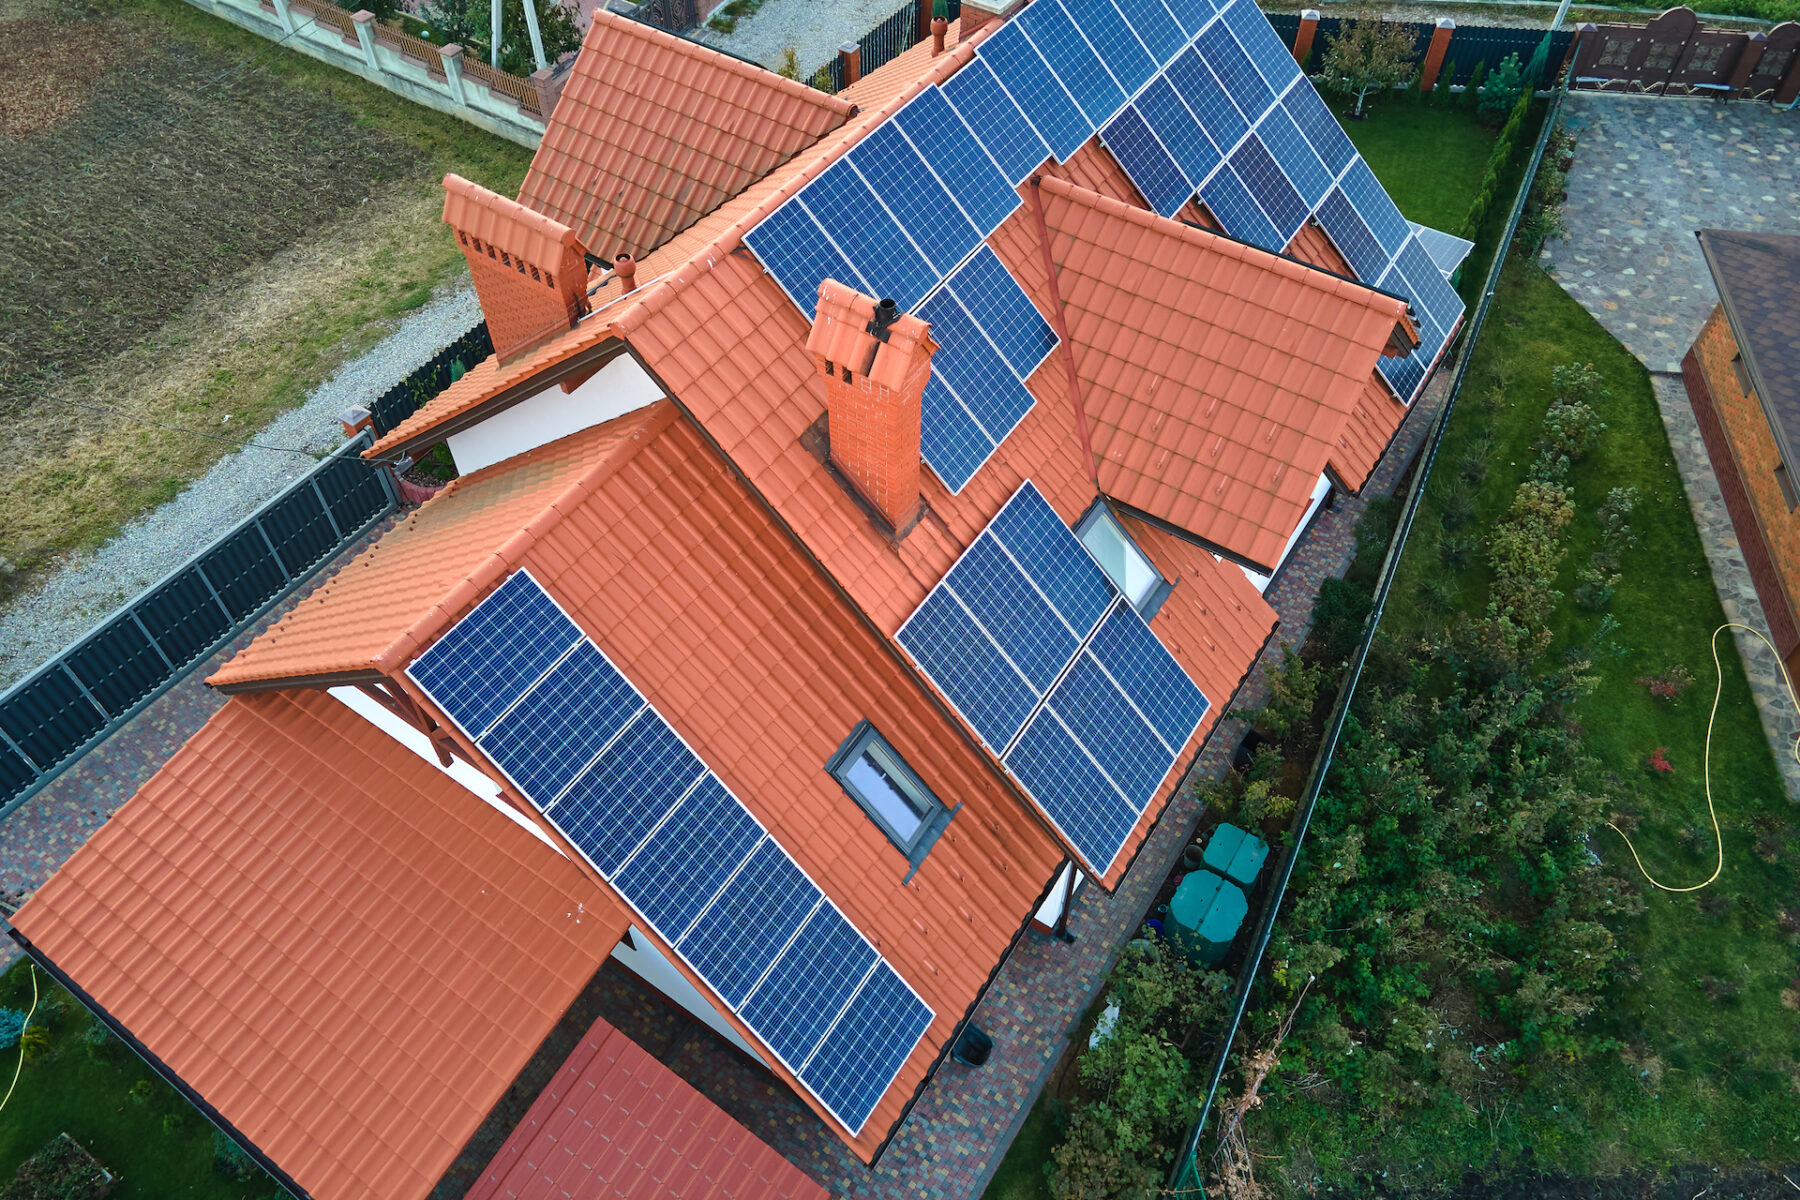 Aerial View Building Roof With Rows Of Blue Solar Photovoltaic Panels For Producing Clean Ecological Electric Energy. Renewable Electricity With Zero Emission Concept